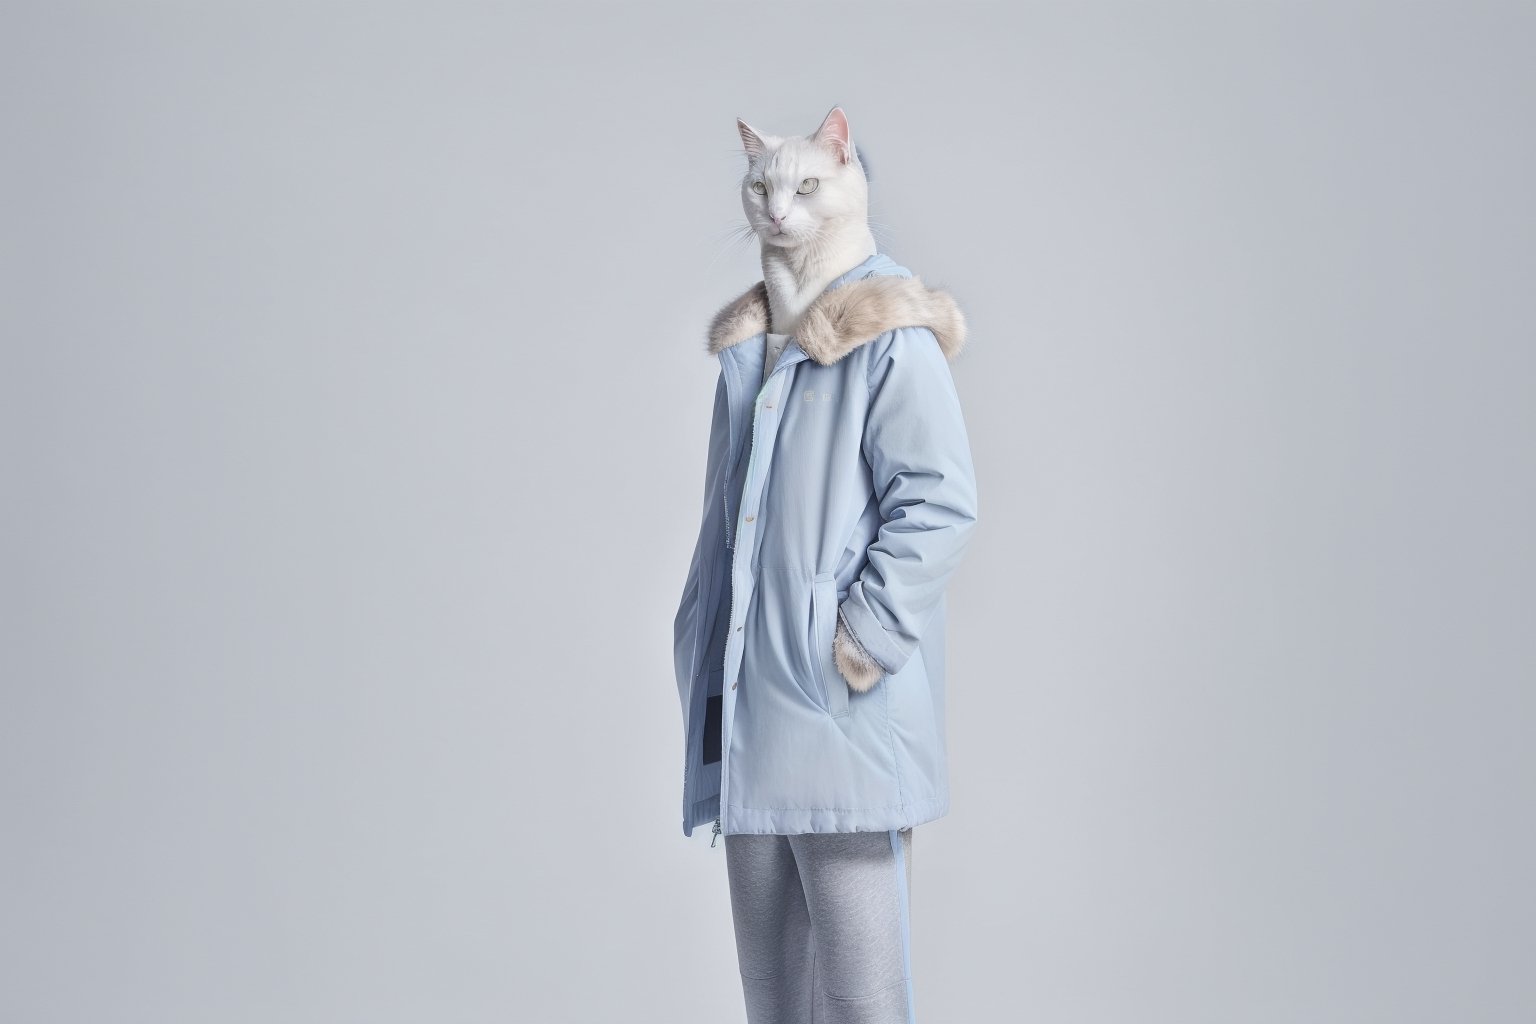 An anthropomorphic white cat, wearing a down jacket and sweatpants, sneakers,multi layered design clothing, with a clear face and long hair shaped like a shoulder length wool hat, wearing a fur coat with a hood against a light blue background,a full body photo,  